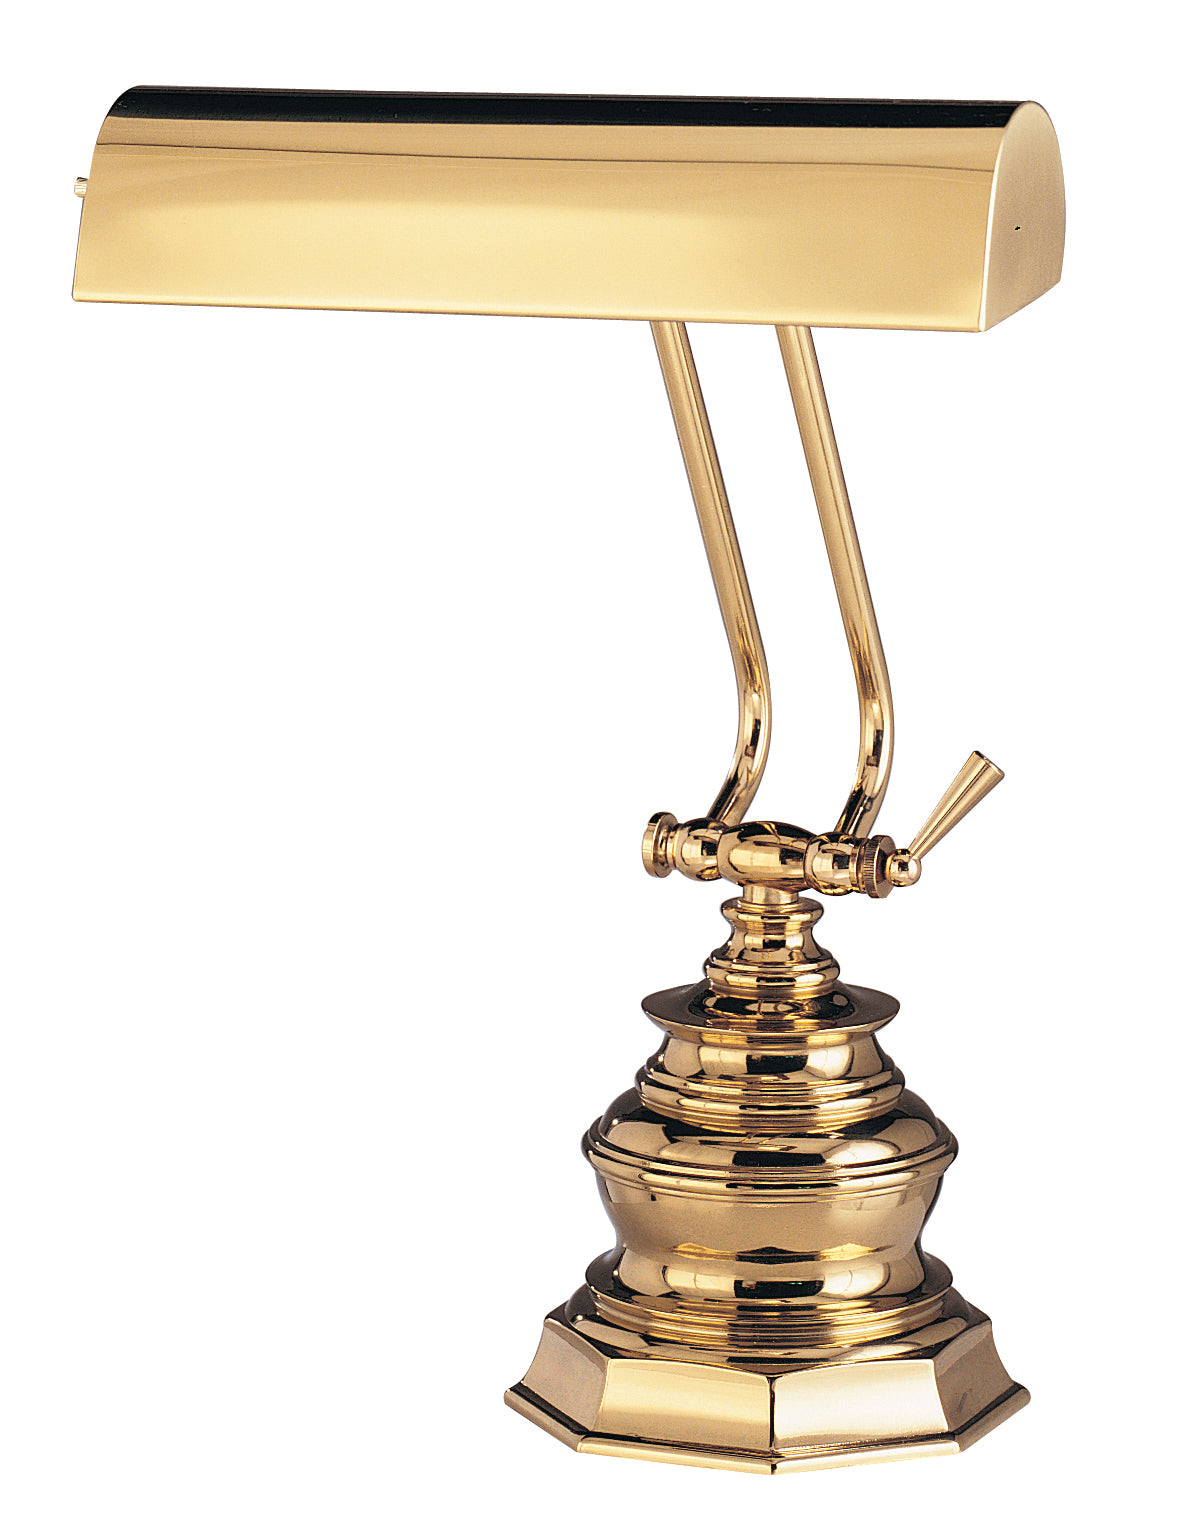 House of Troy Desk/Piano Lamp 10" in Polished Brass P10-111